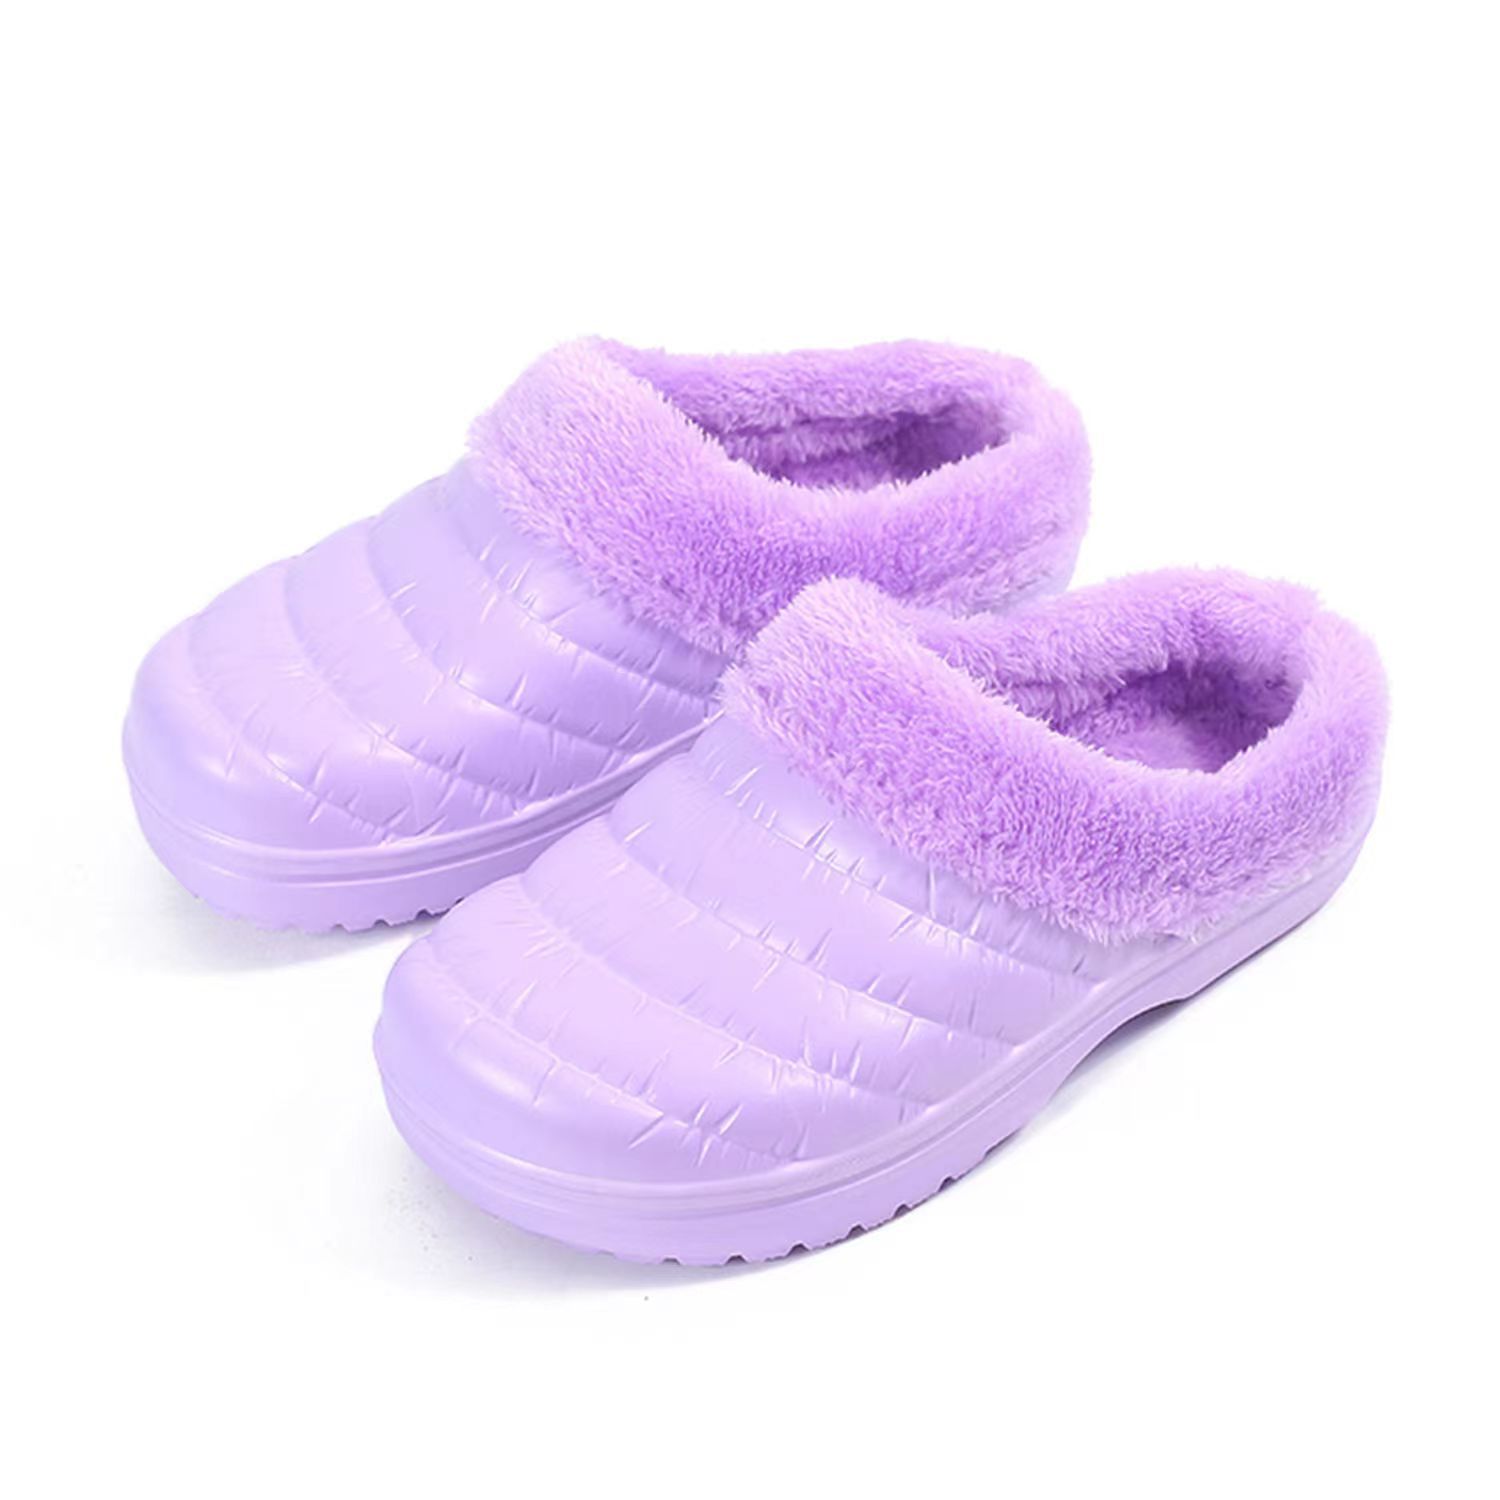 Winter Fleece-lined Lightweight One-Time Molding Eva Women's Half-Pack Plush Heel Cotton Slippers Laundry Car Wash Kitchen Work Shoes